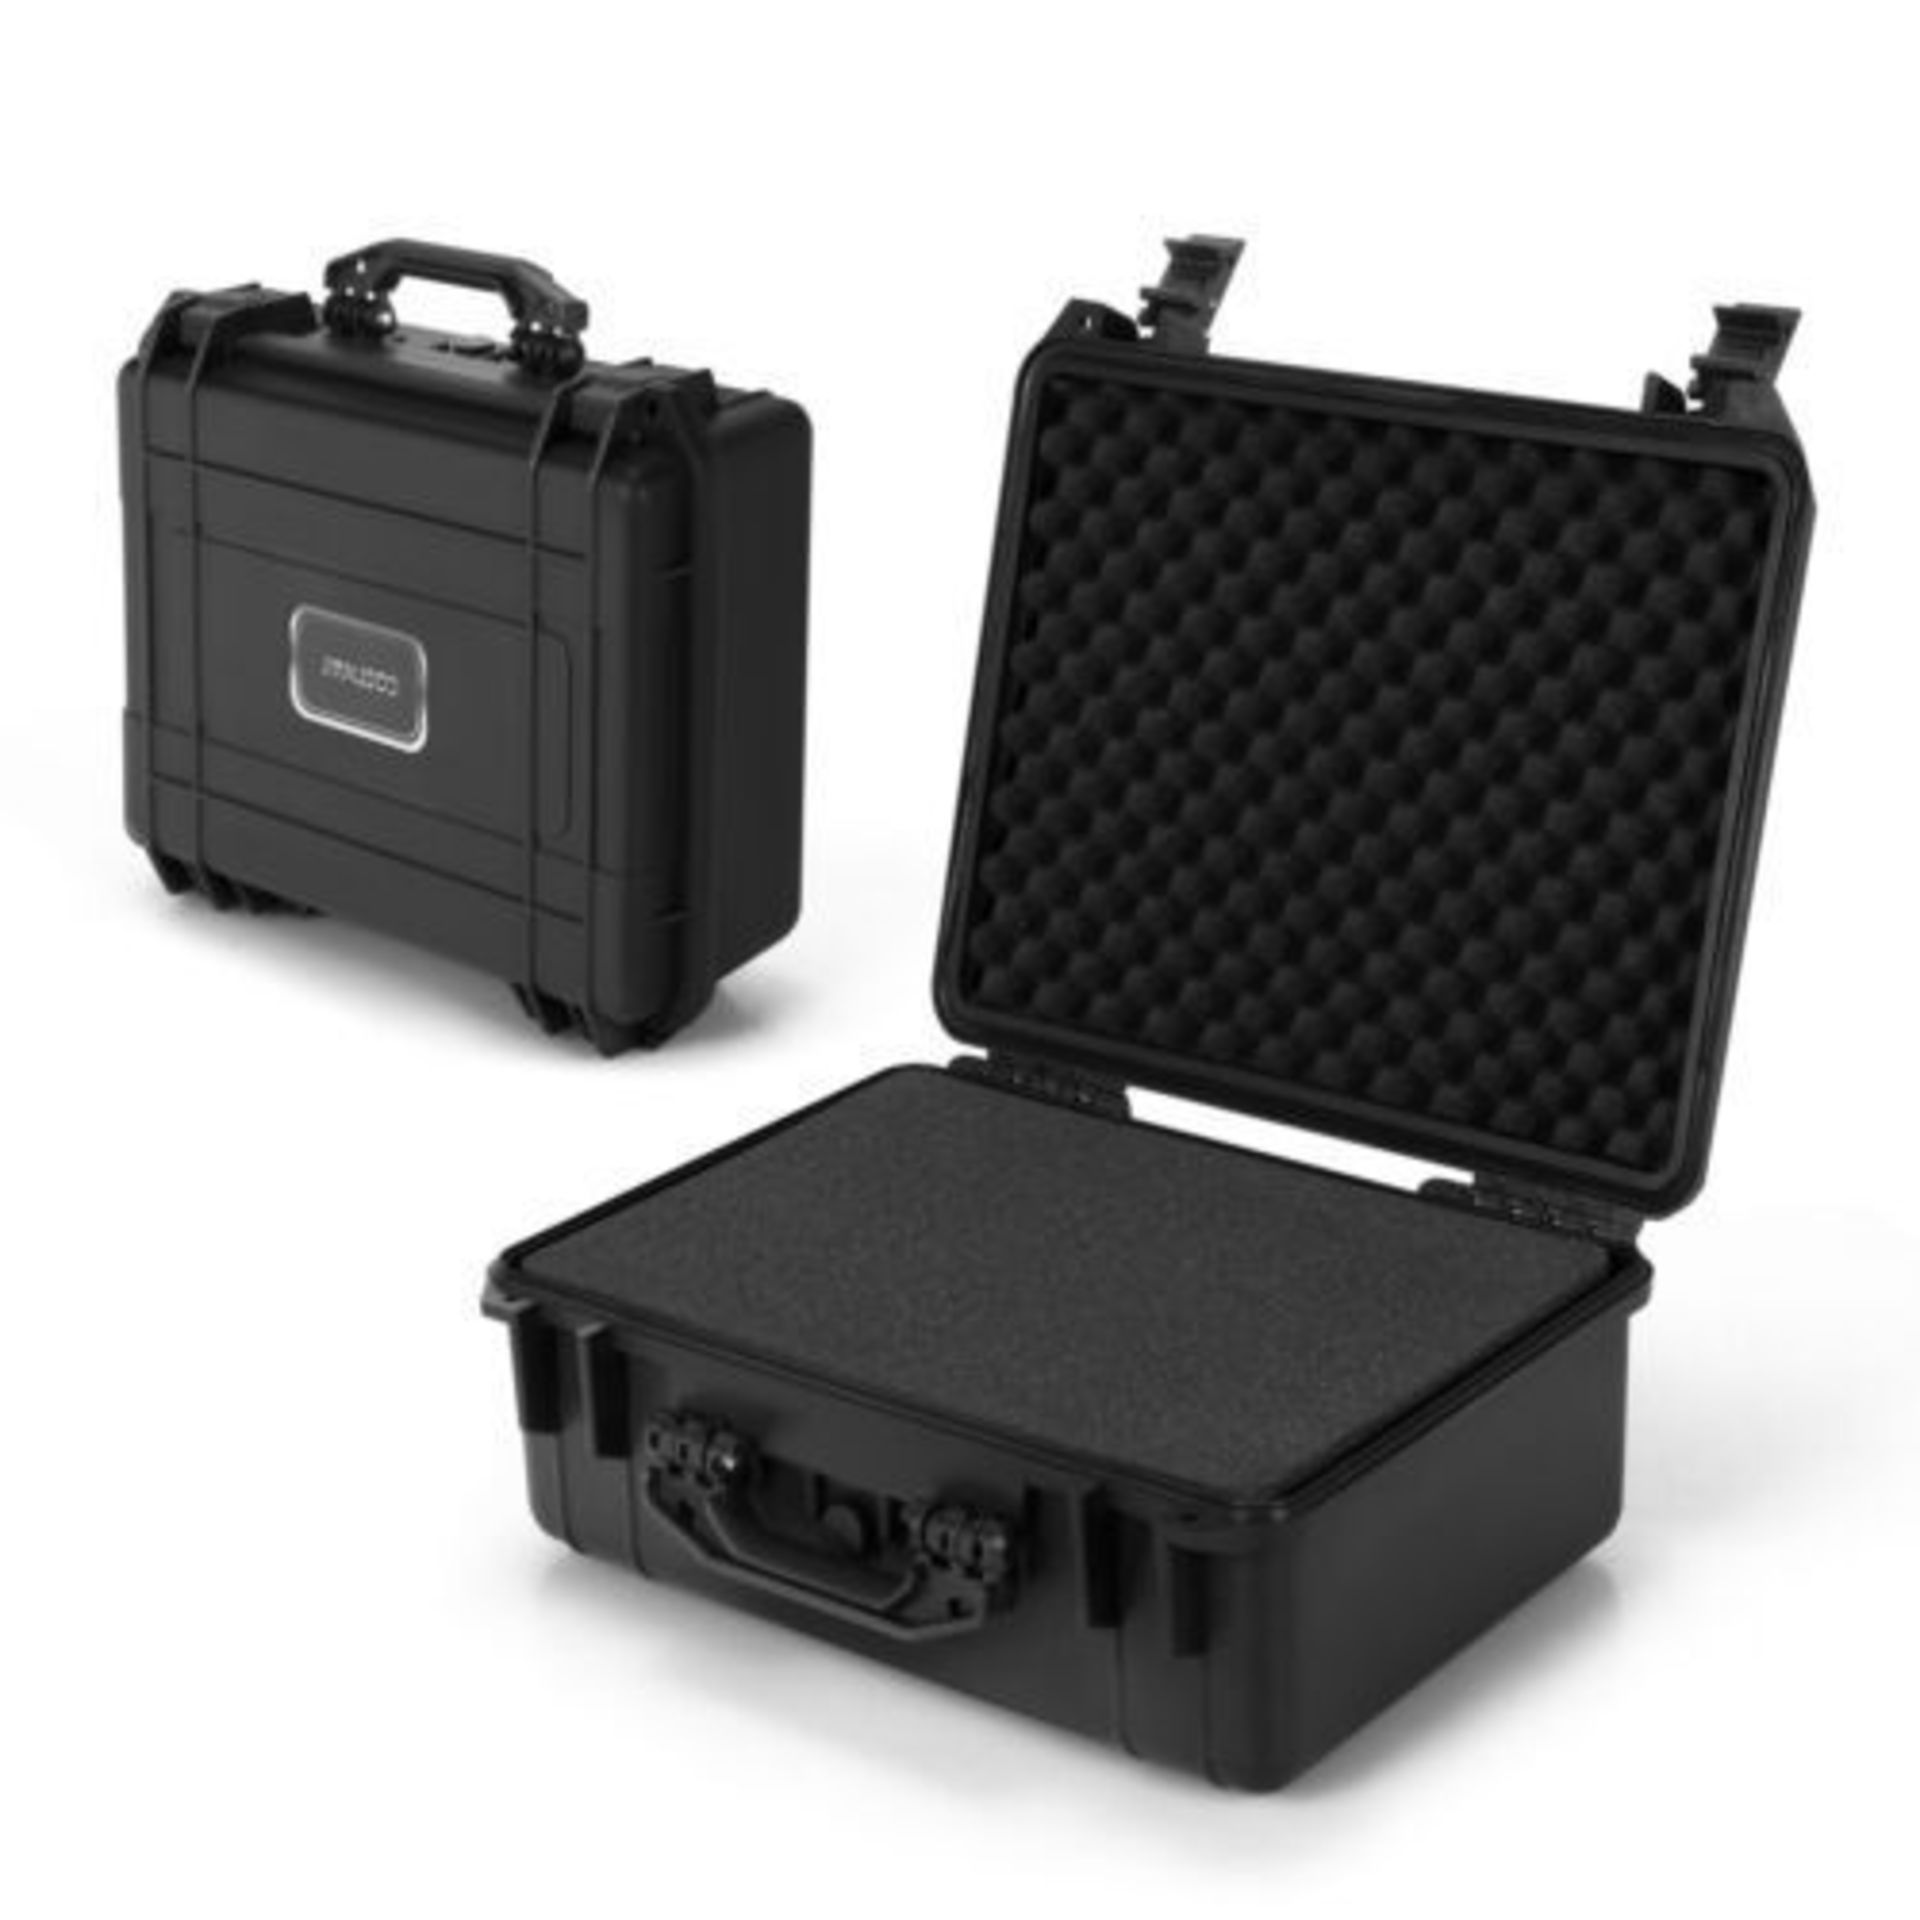 Portable Waterproof Hard Case with Customizable Fit Foam. - ER24. Made of premium PP material, the